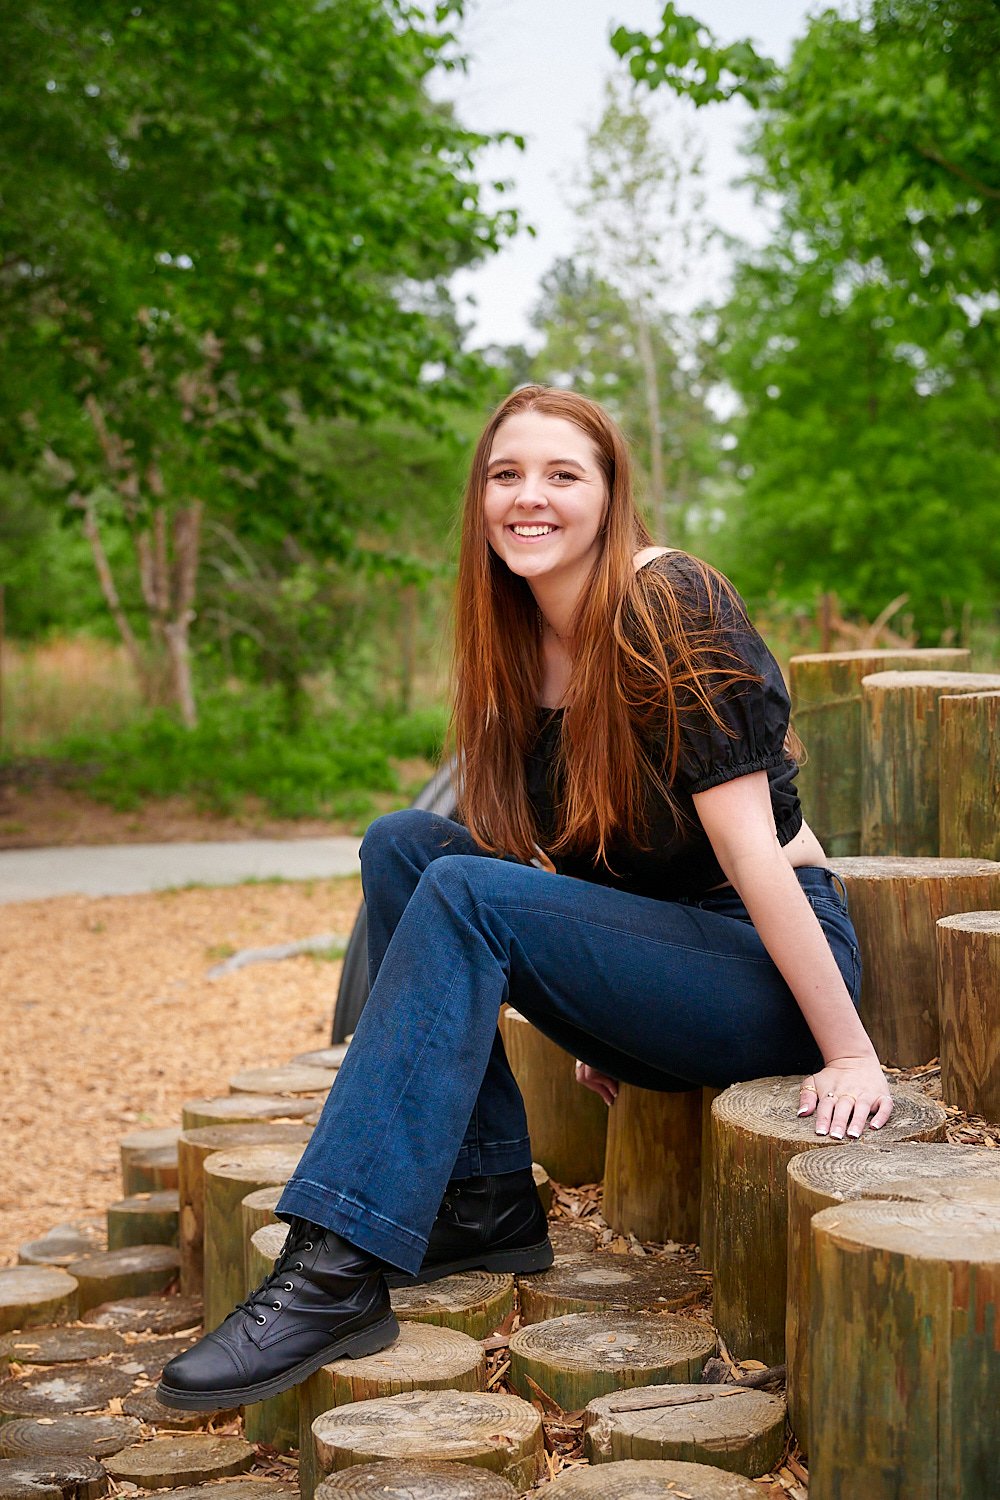  HOUSTON, TEXAS - MARCH 2023: Jillin Asbill, a pretty 17-year-old red-haired and round-faced girl in a black cropped top and navy blue jeans is posing for high school senior portraits for a yearbook. 